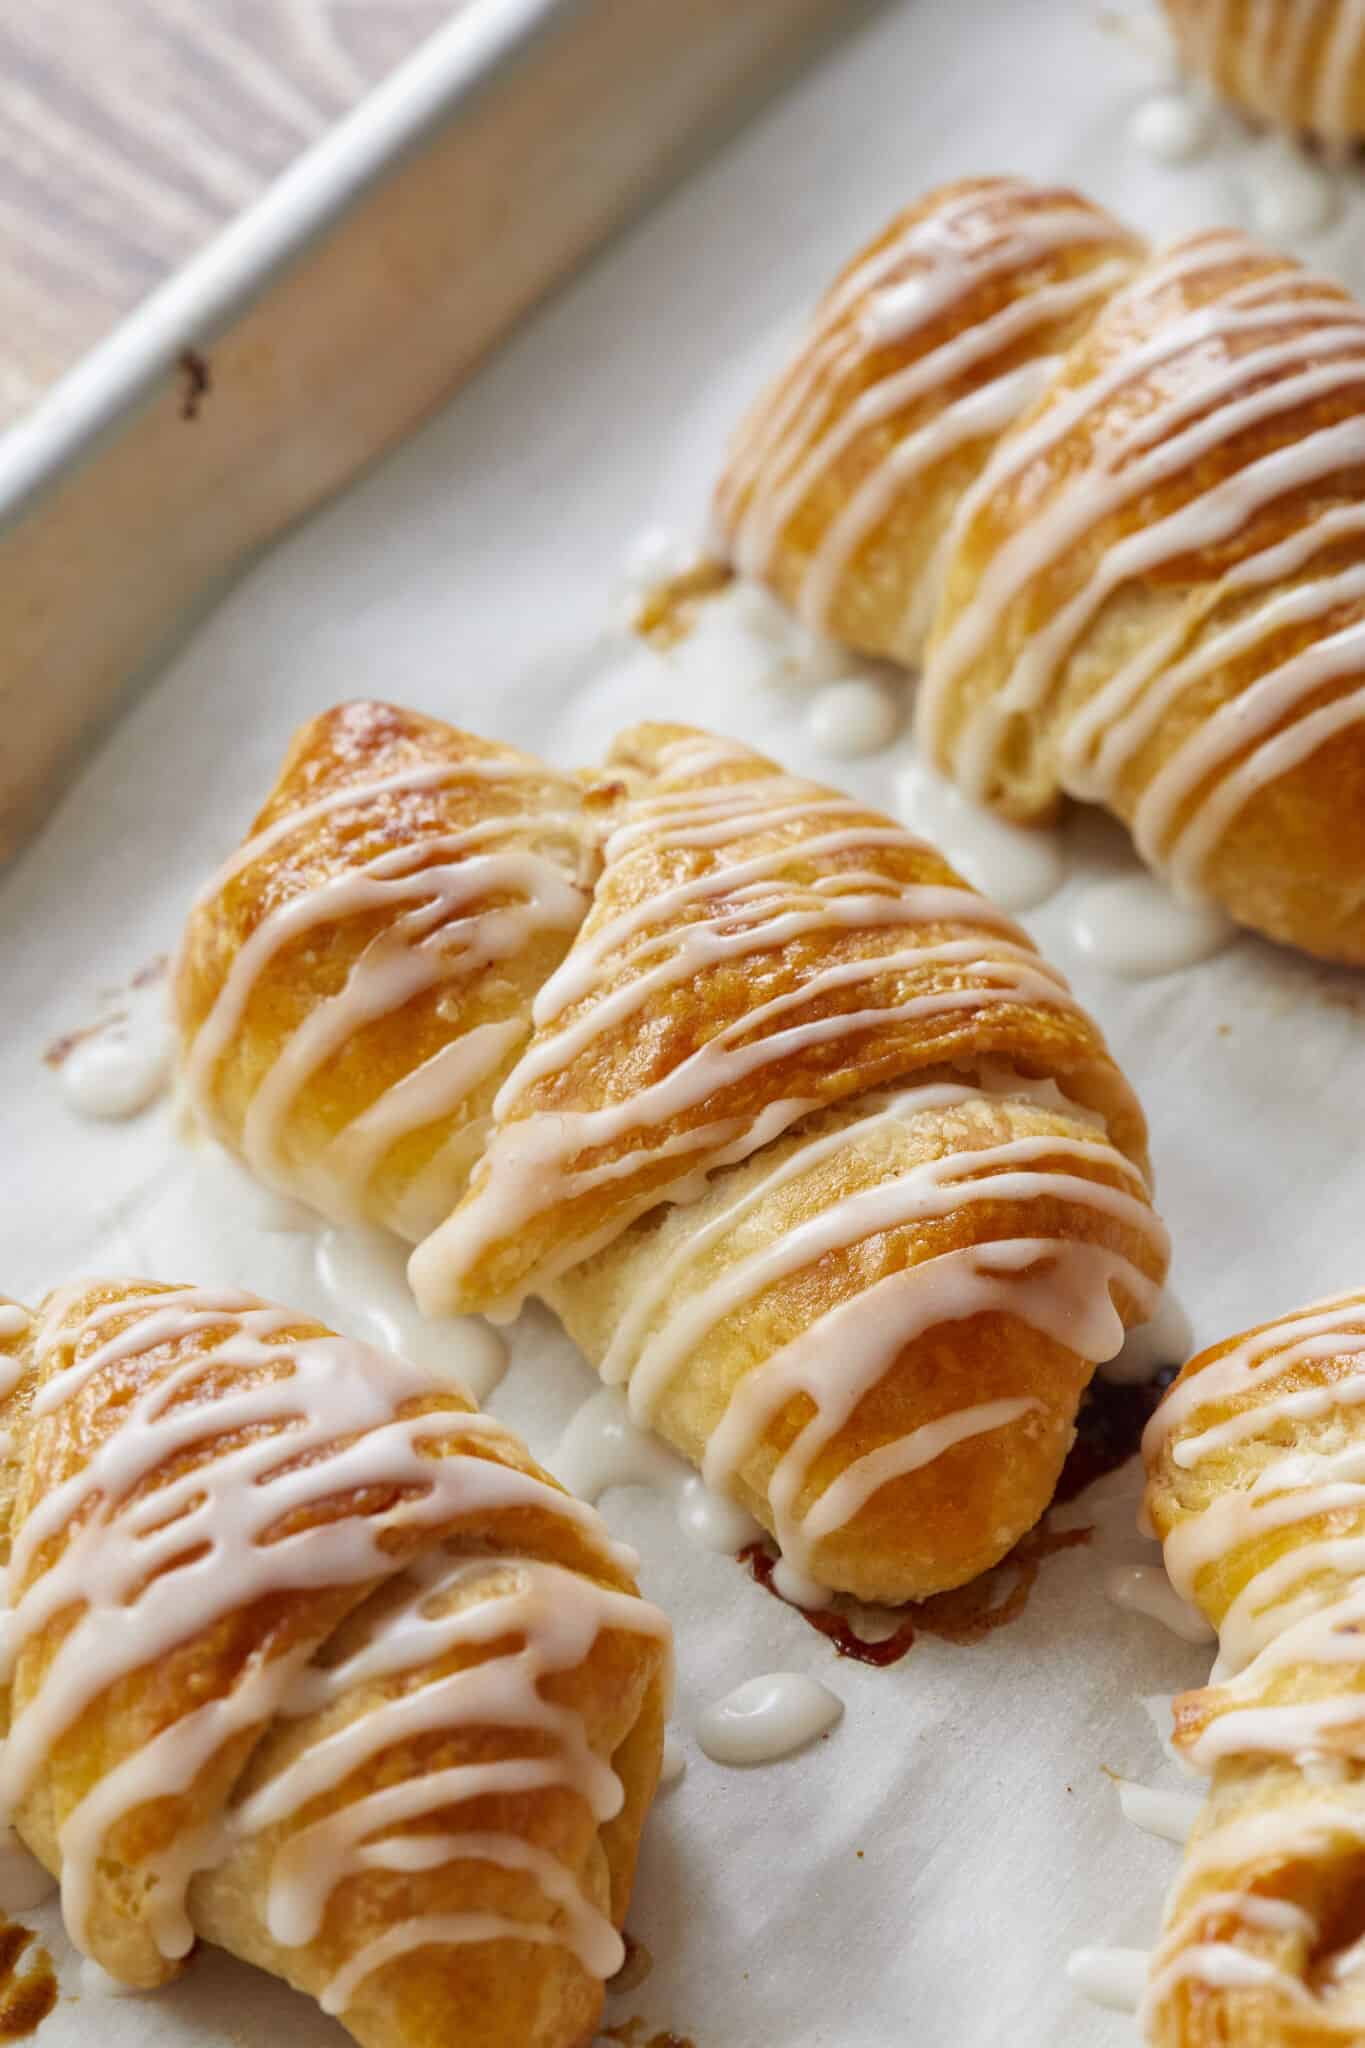 The rolls are baked until deep golden brown in a parchment-lined baking sheet. Vanilla glaze is drizzled over crescent rolls and setting for about 30 minutes. 